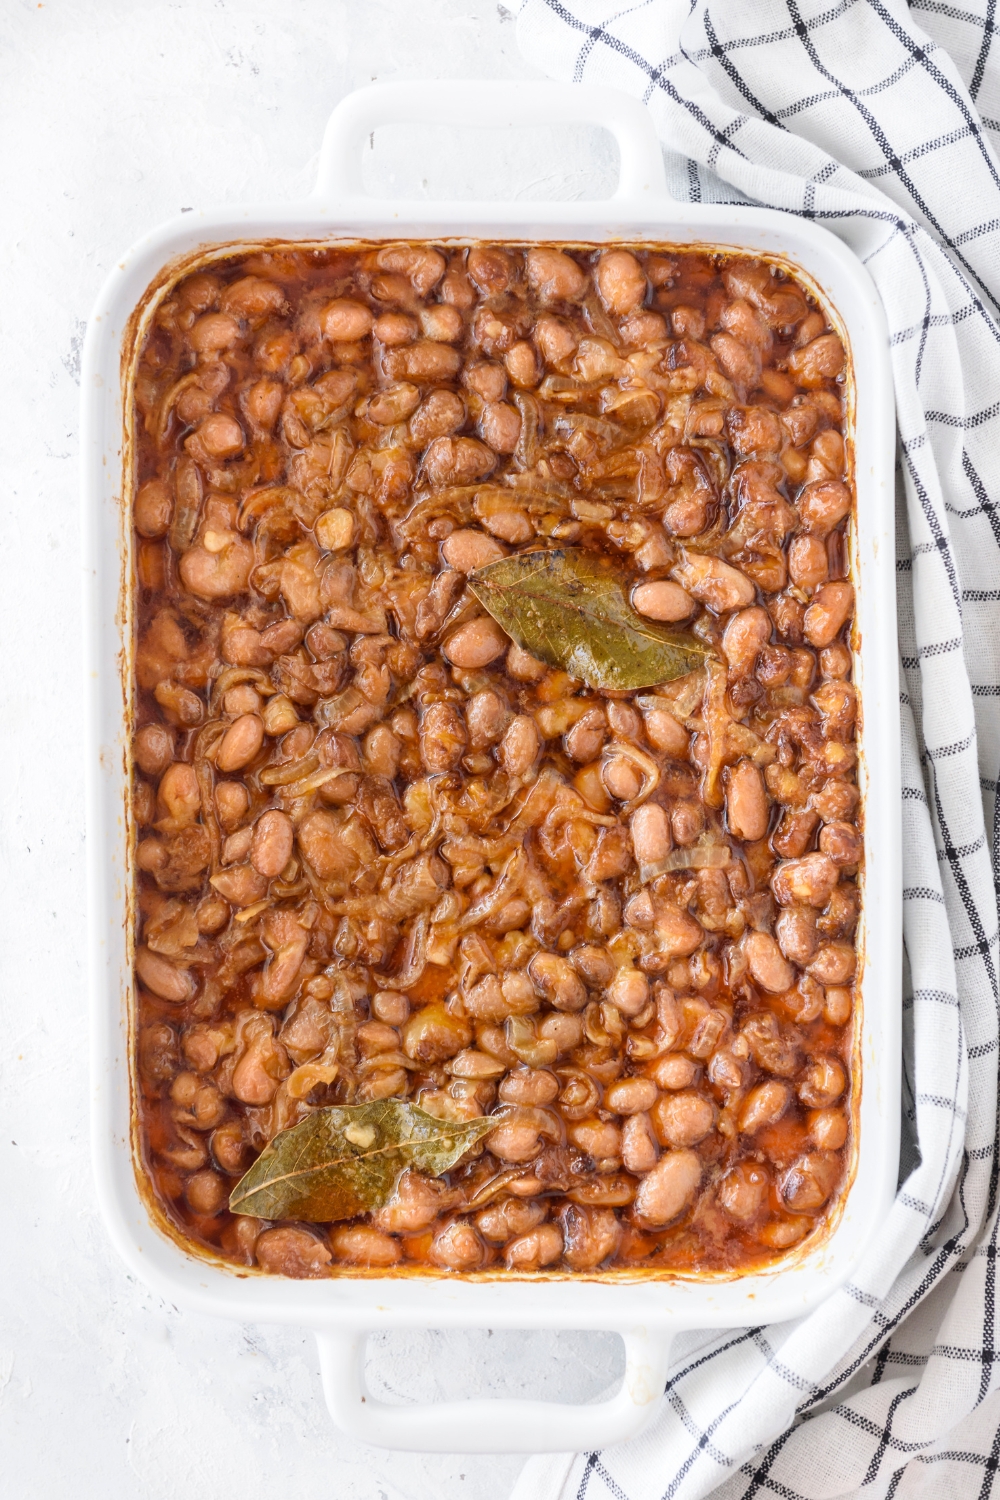 A baking dish filled with cooked pinto beans mixed with sautéed onions and two bay leaves.